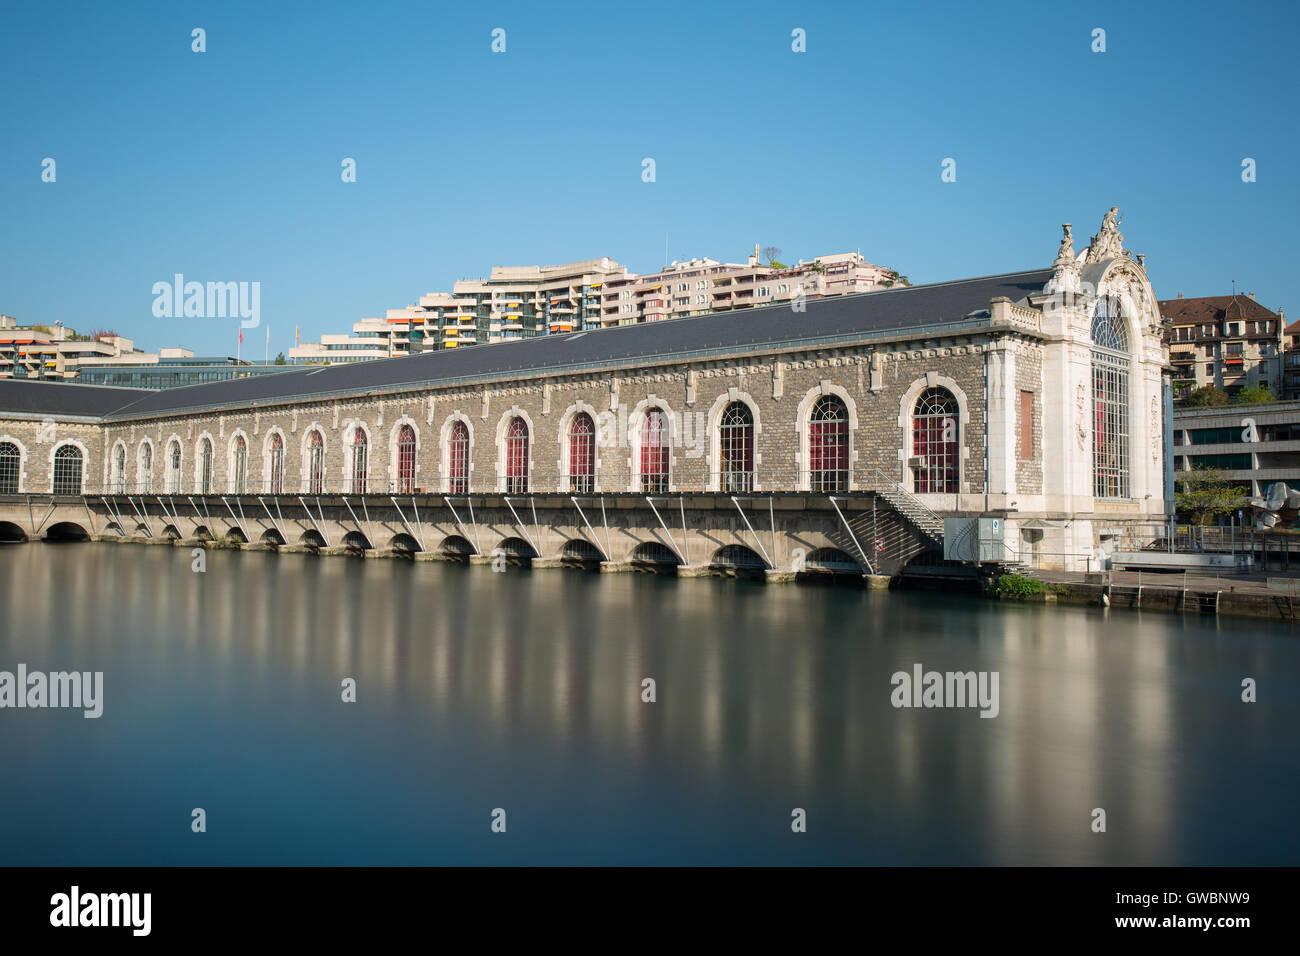 Long exposure view of the Batiment des Forces Motrices on the Rhone ...